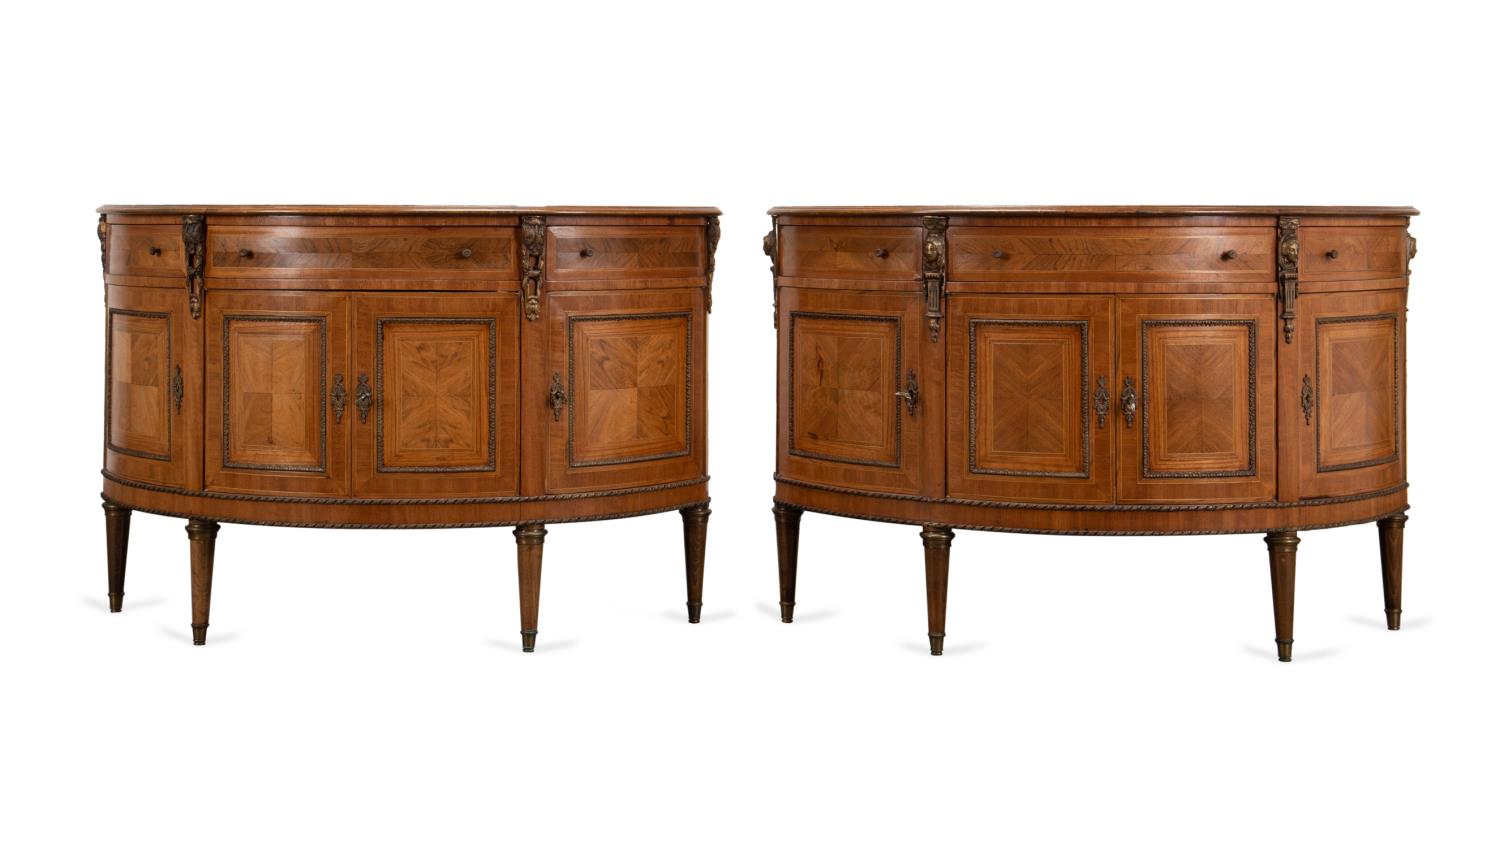 PAIR NEOCLASSICAL STYLE DEMILUNE